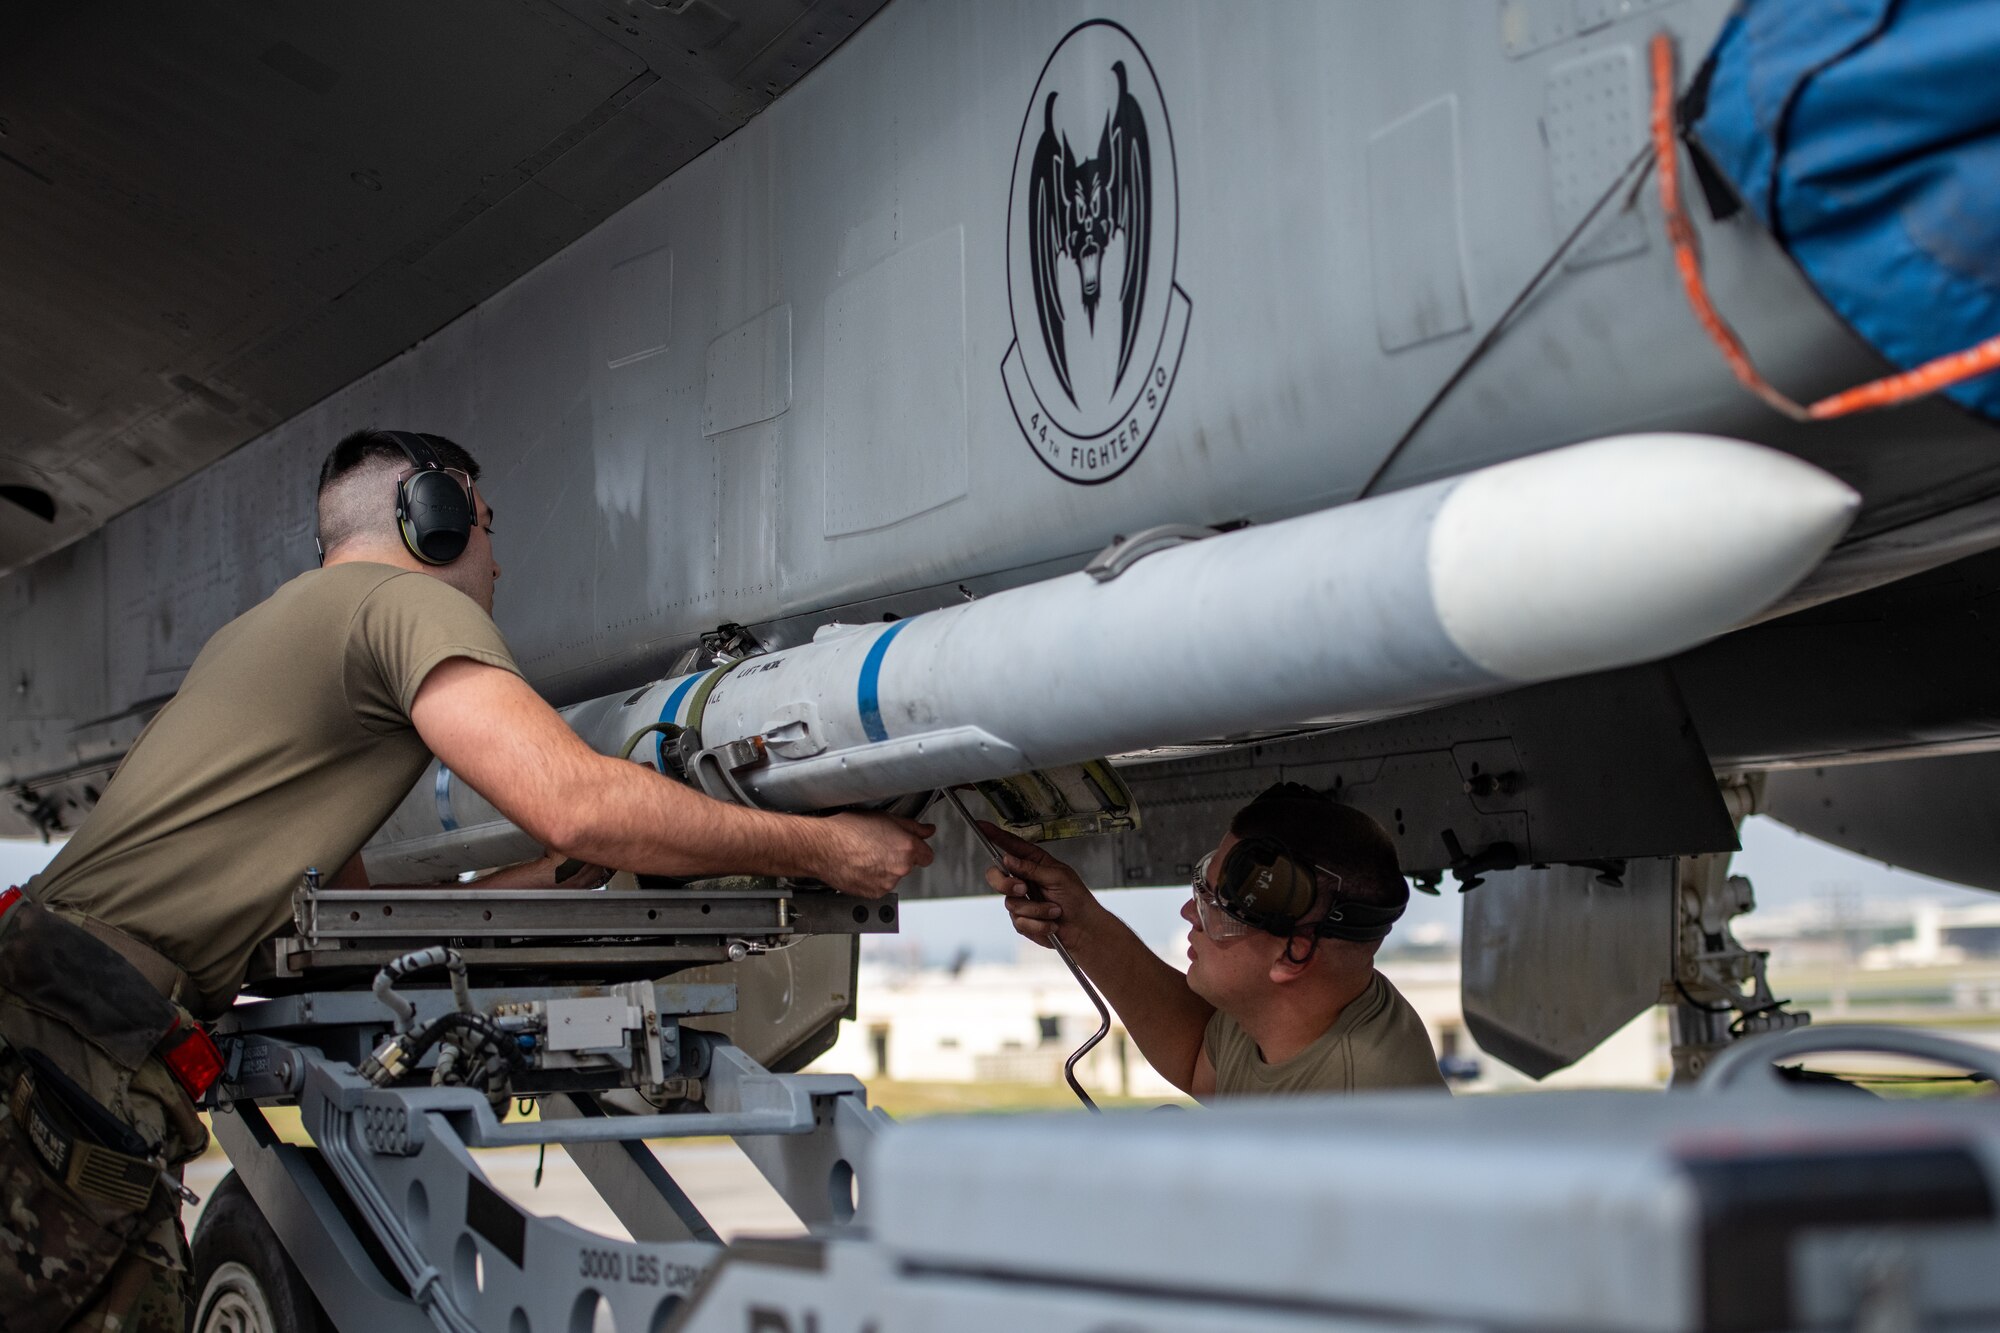 Airmen from the 18th Aircraft Maintenance Squadron load an AIM-120 Advanced Medium Range Air-to-Air Missile onto an F-15C Eagle during a weapons load competition at Kadena Air Base, Japan, Nov. 17, 2023. The competition pitted Active Duty and Air National Guard Airmen from three squadrons against each other to determine the finest weapons load team at the Keystone of the Pacific. (U.S. Air Force Photo by Lt. Col. Raymond Geoffroy)